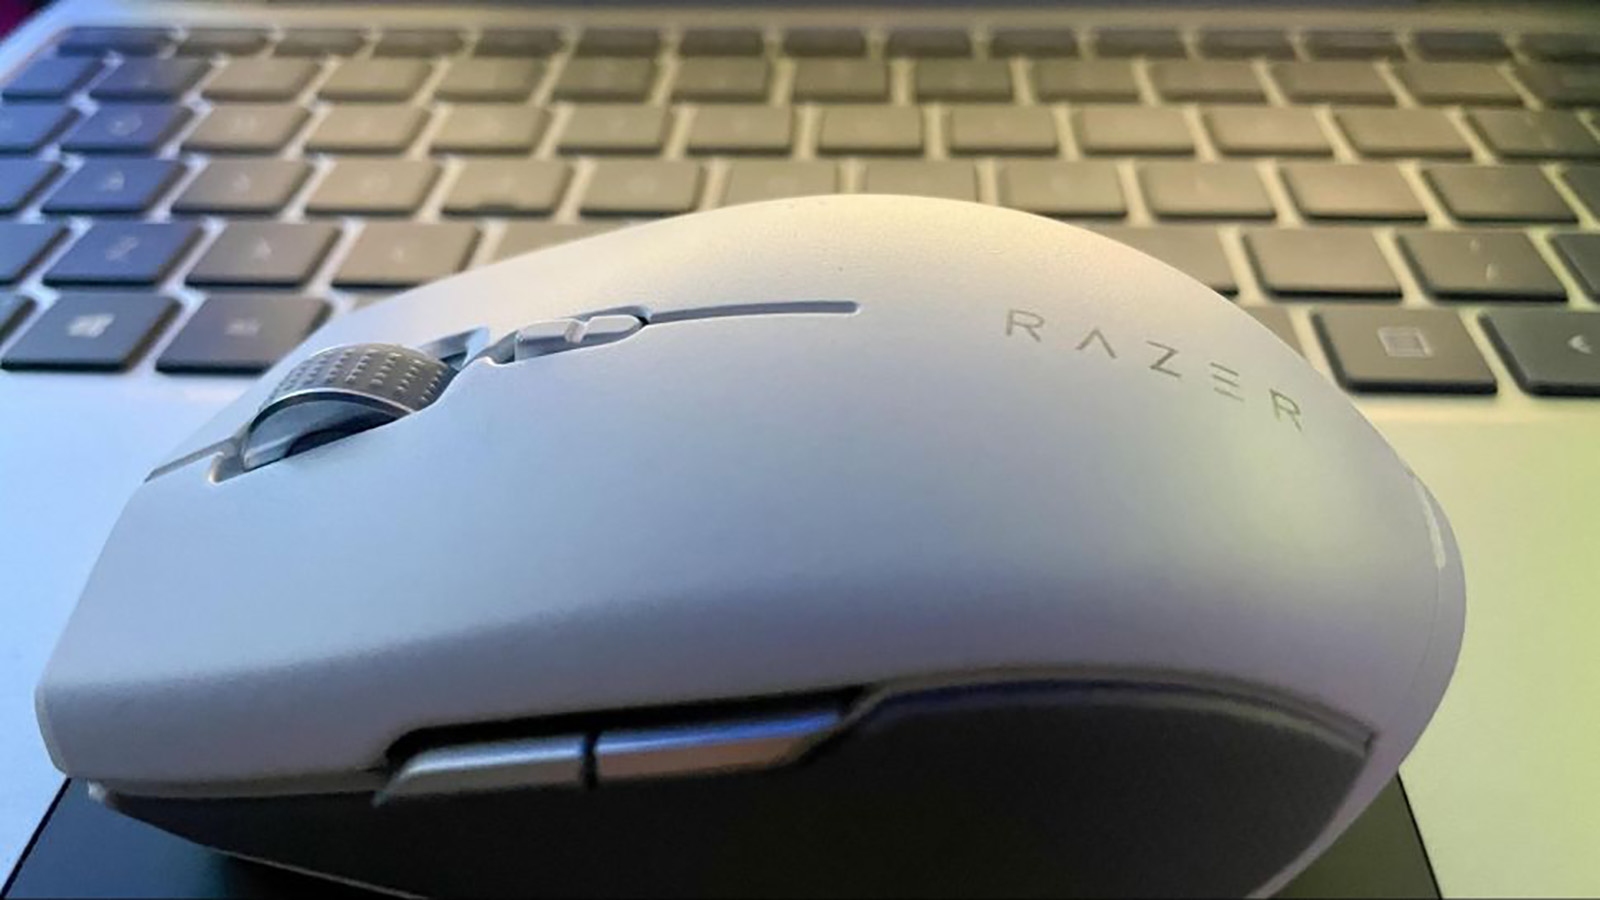 What are the features of the best wireless mouse?